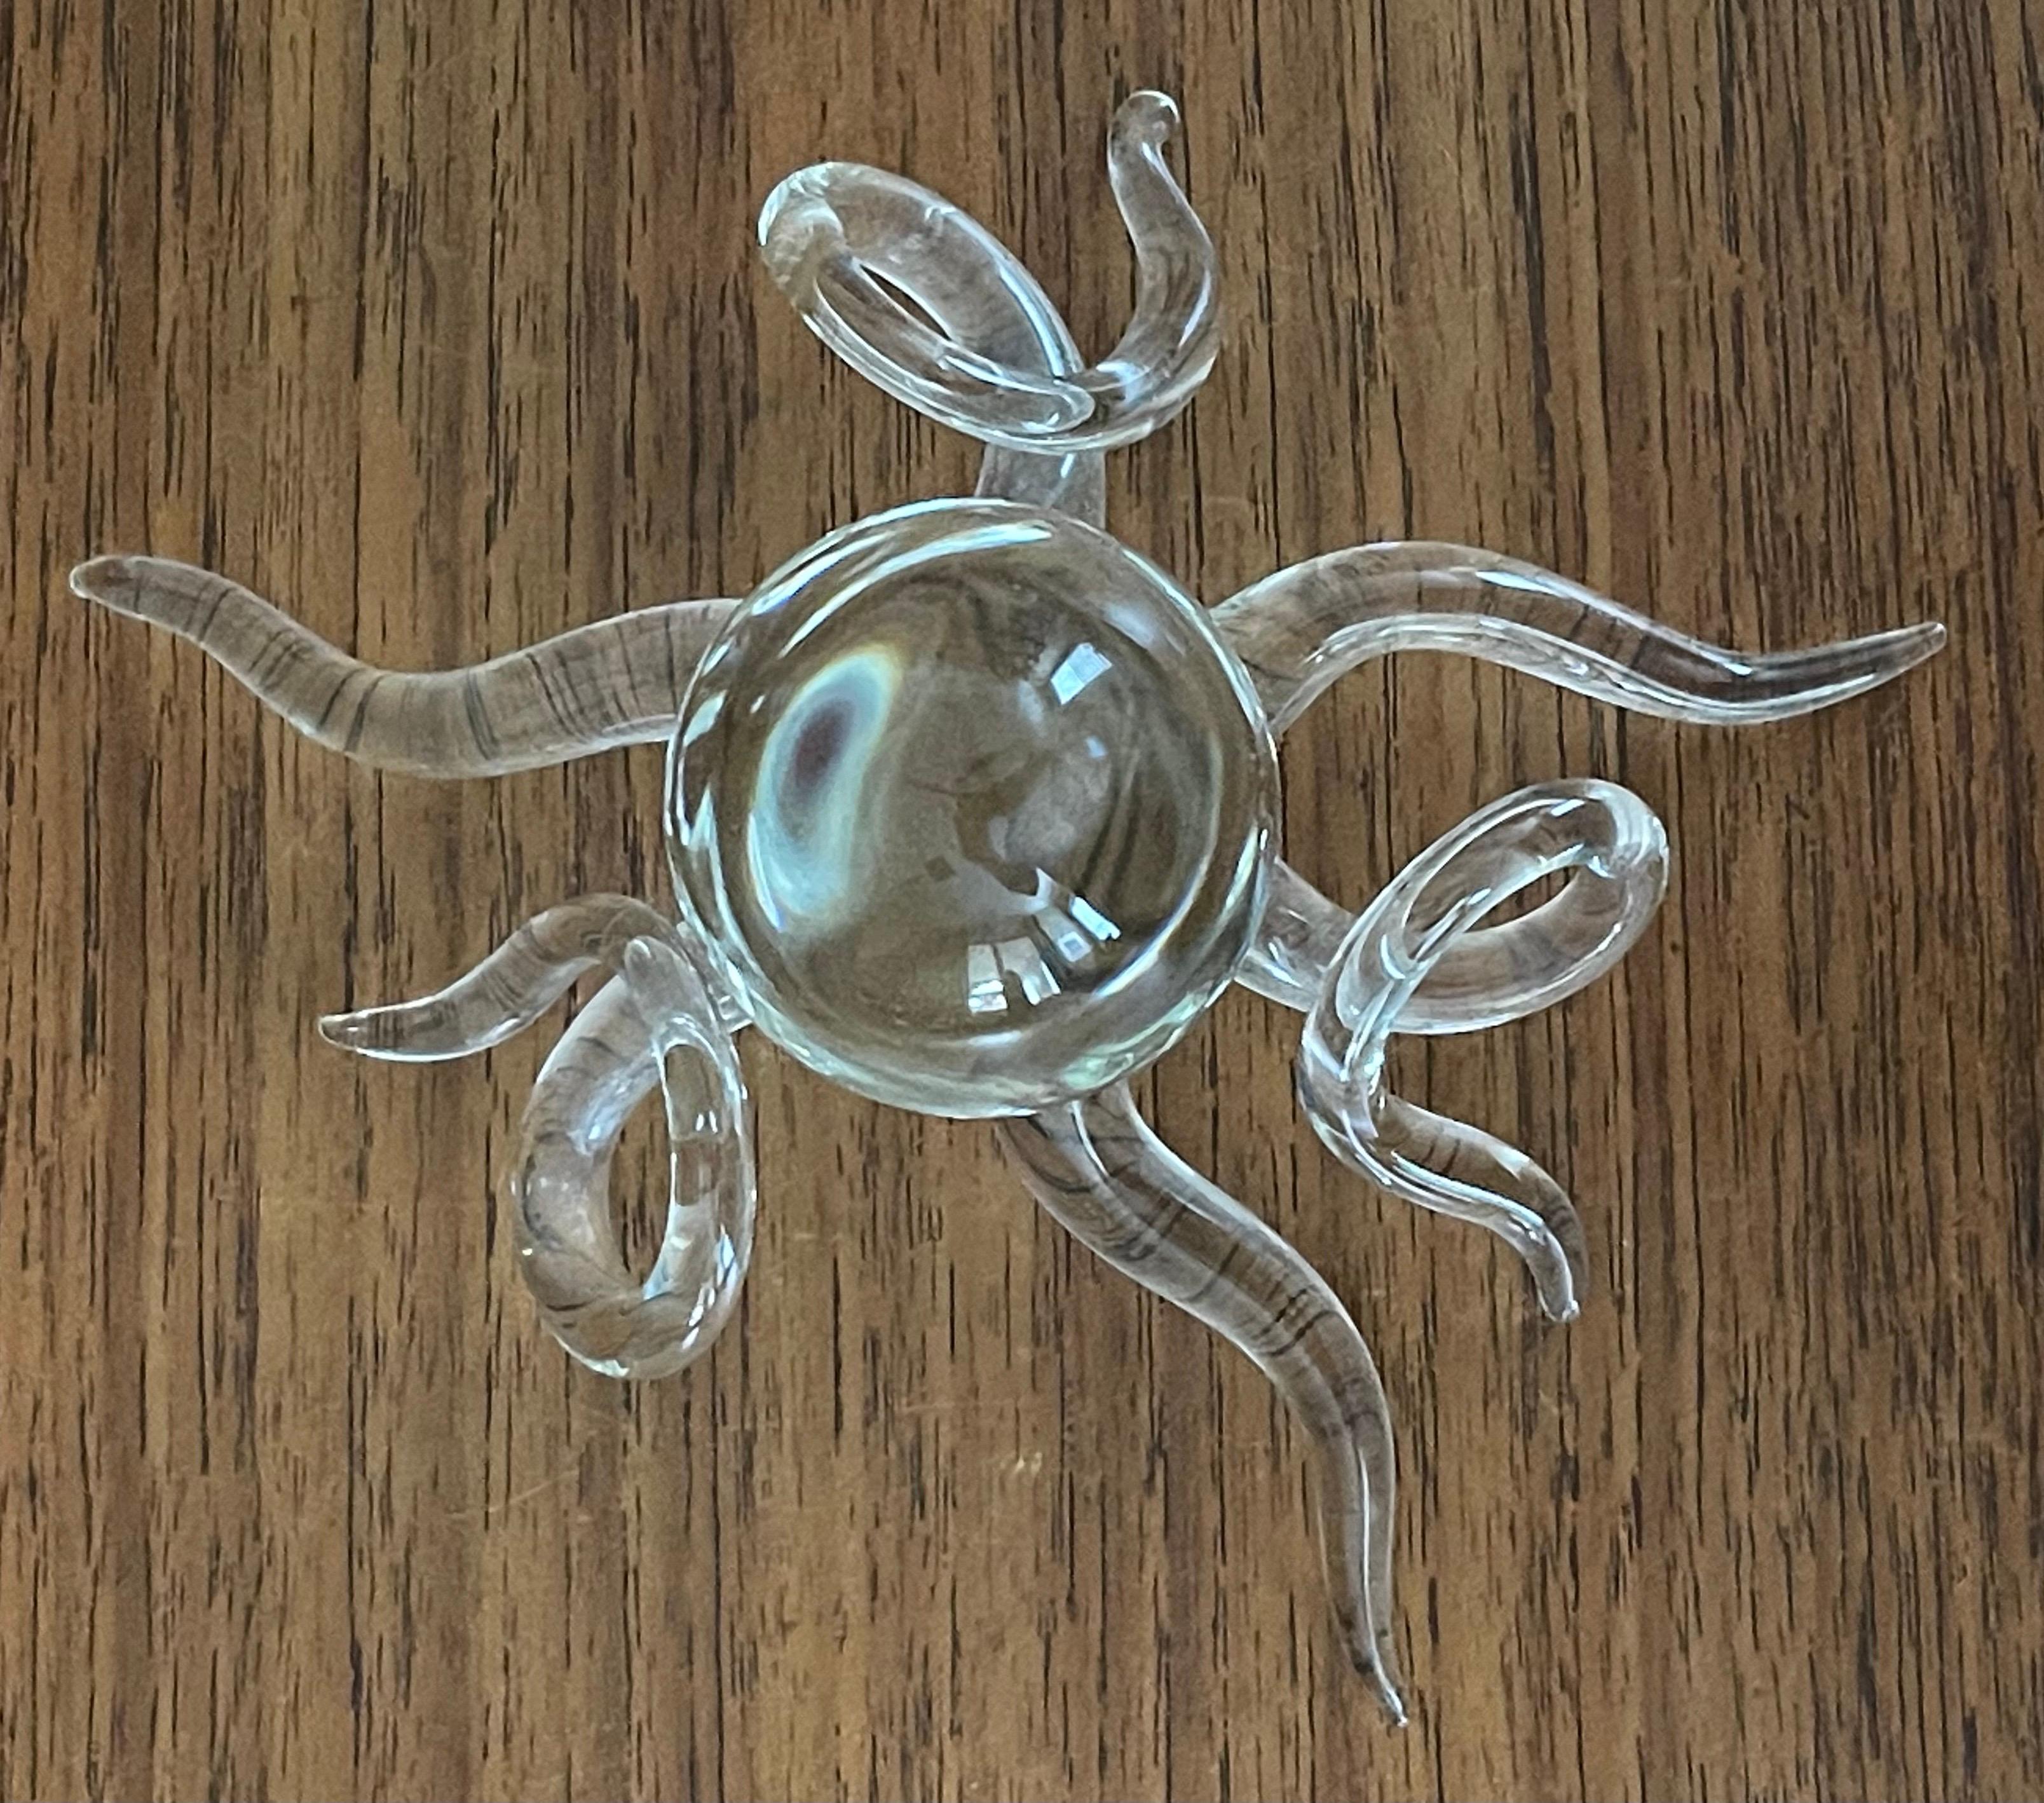 20th Century Art Glass Octopus Sculpture by Hans Godo Frabel For Sale